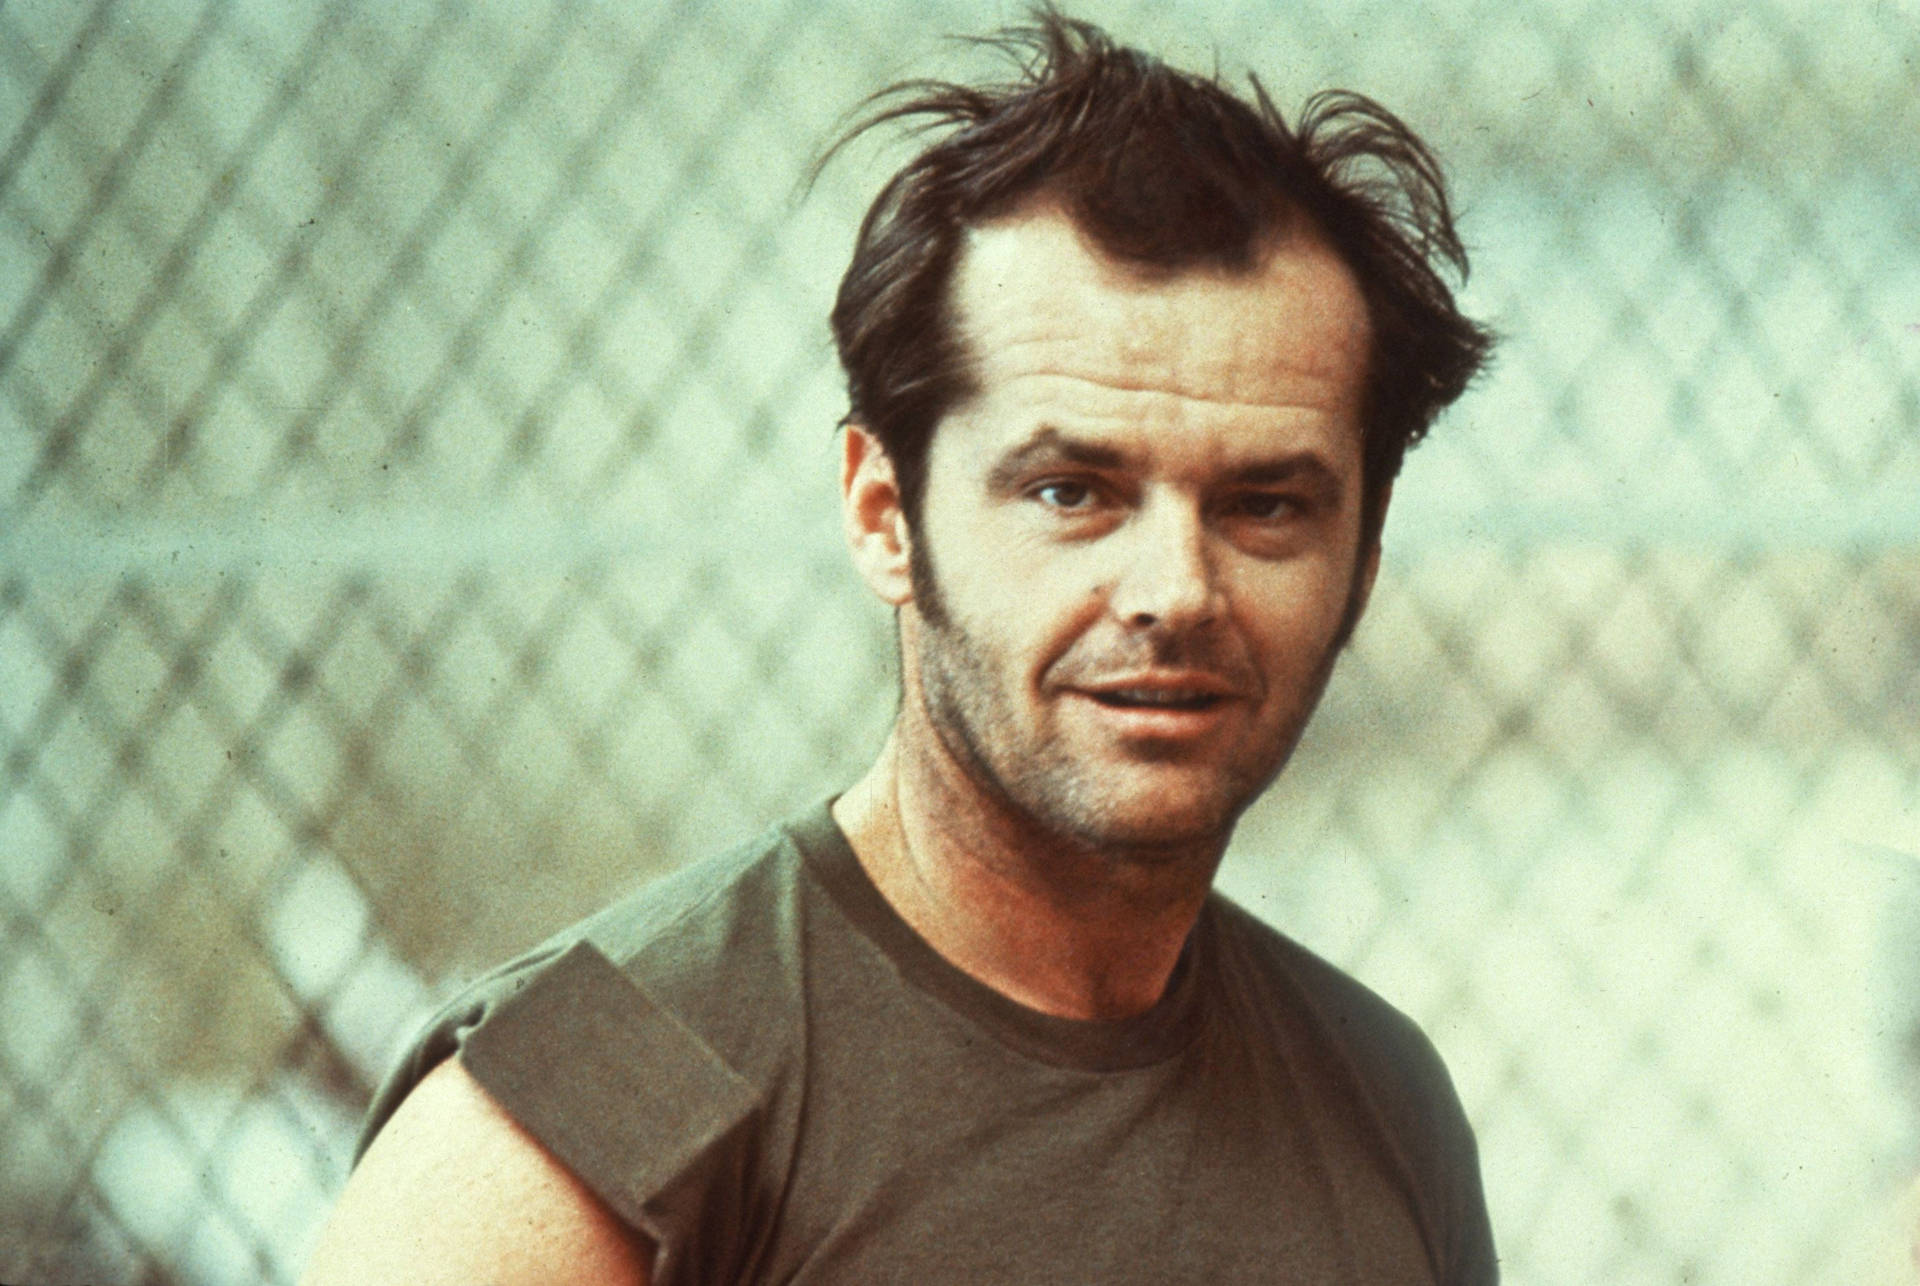 Jack Nicholson in One Flew Over the Cuckoo's Nest Wallpaper